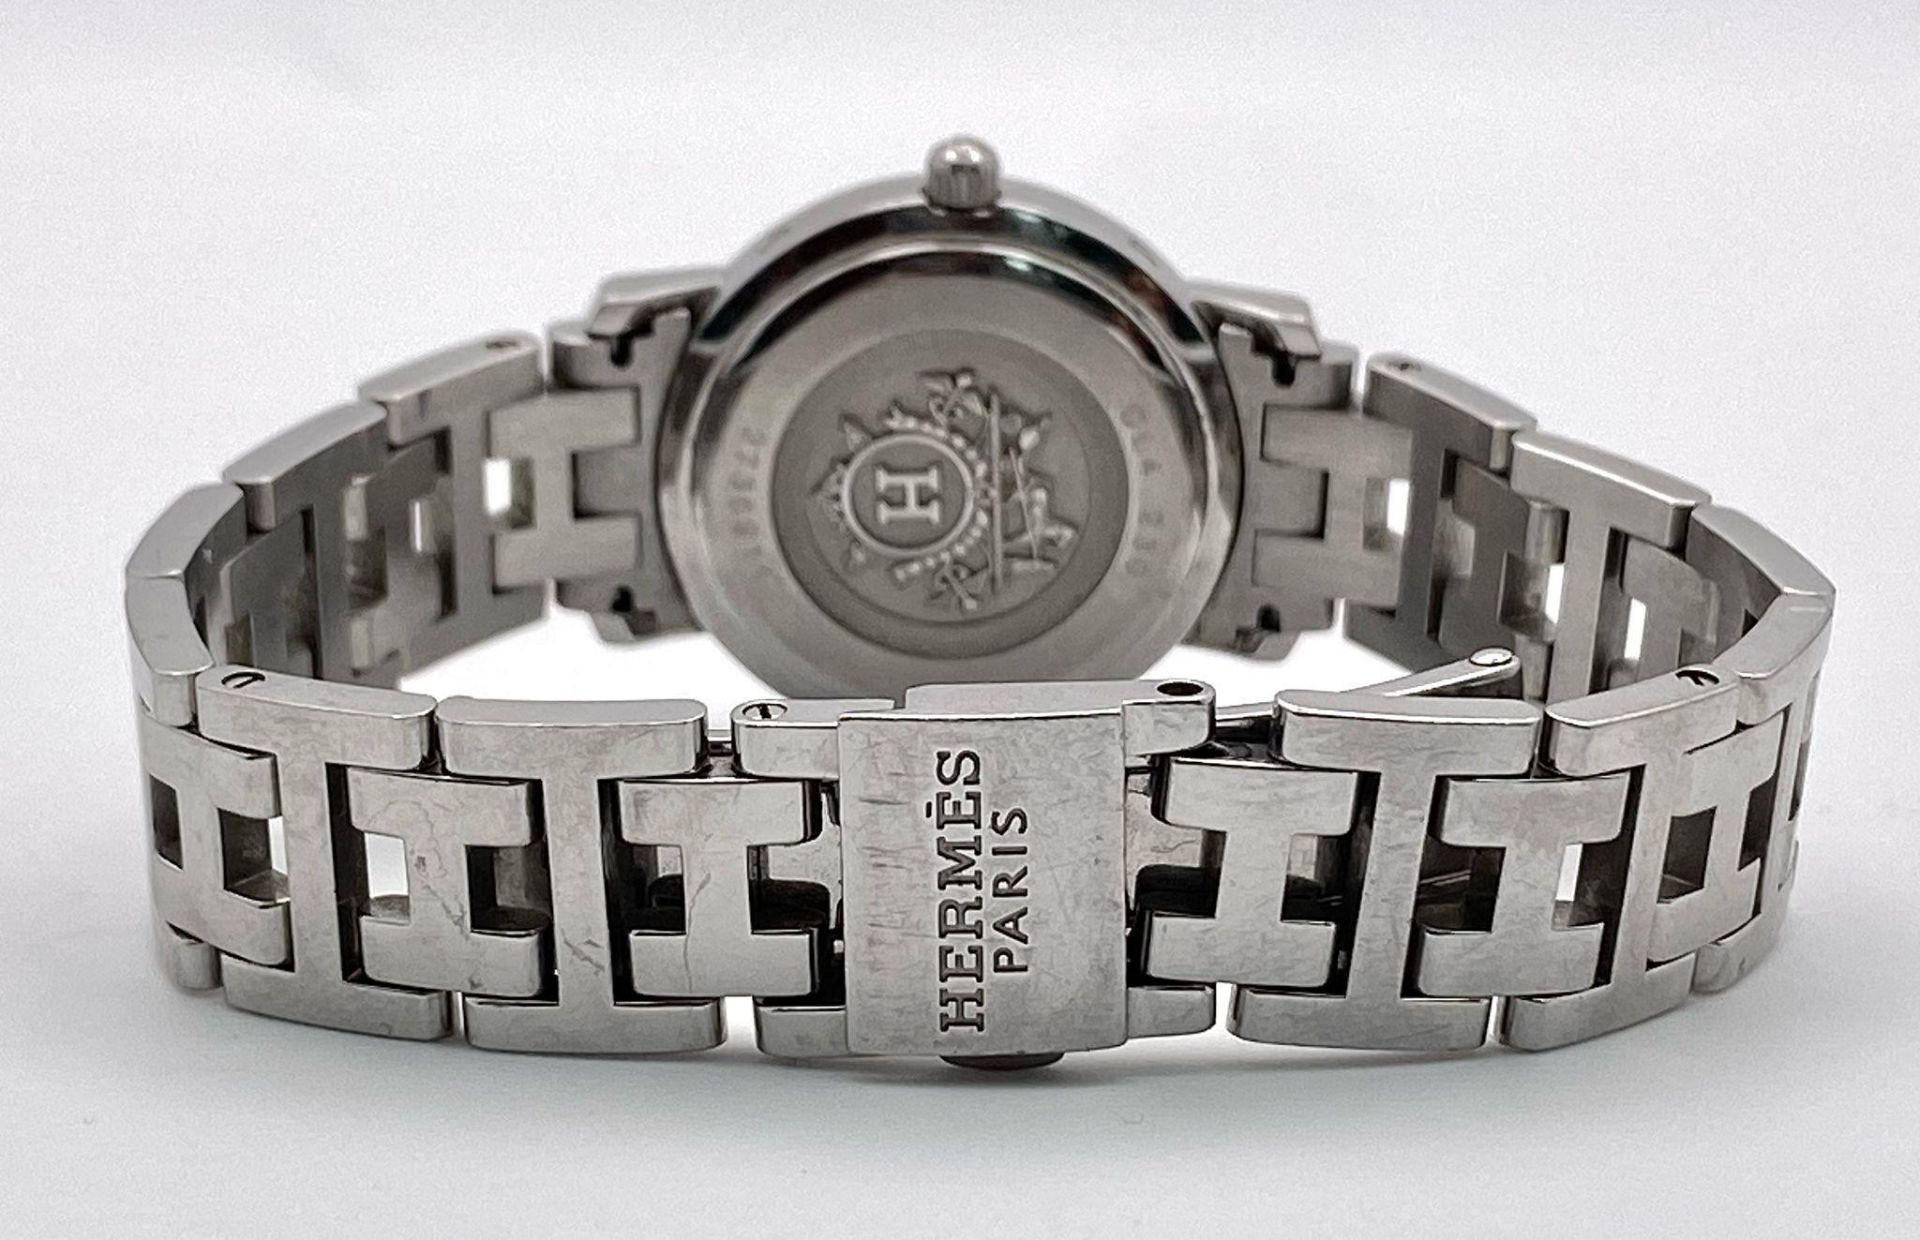 A "HERMES" STAINLESS STEEL LADIES QUARTZ WATCH WITH DIAMOND OUTER BEZEL. 24mm - Image 6 of 8